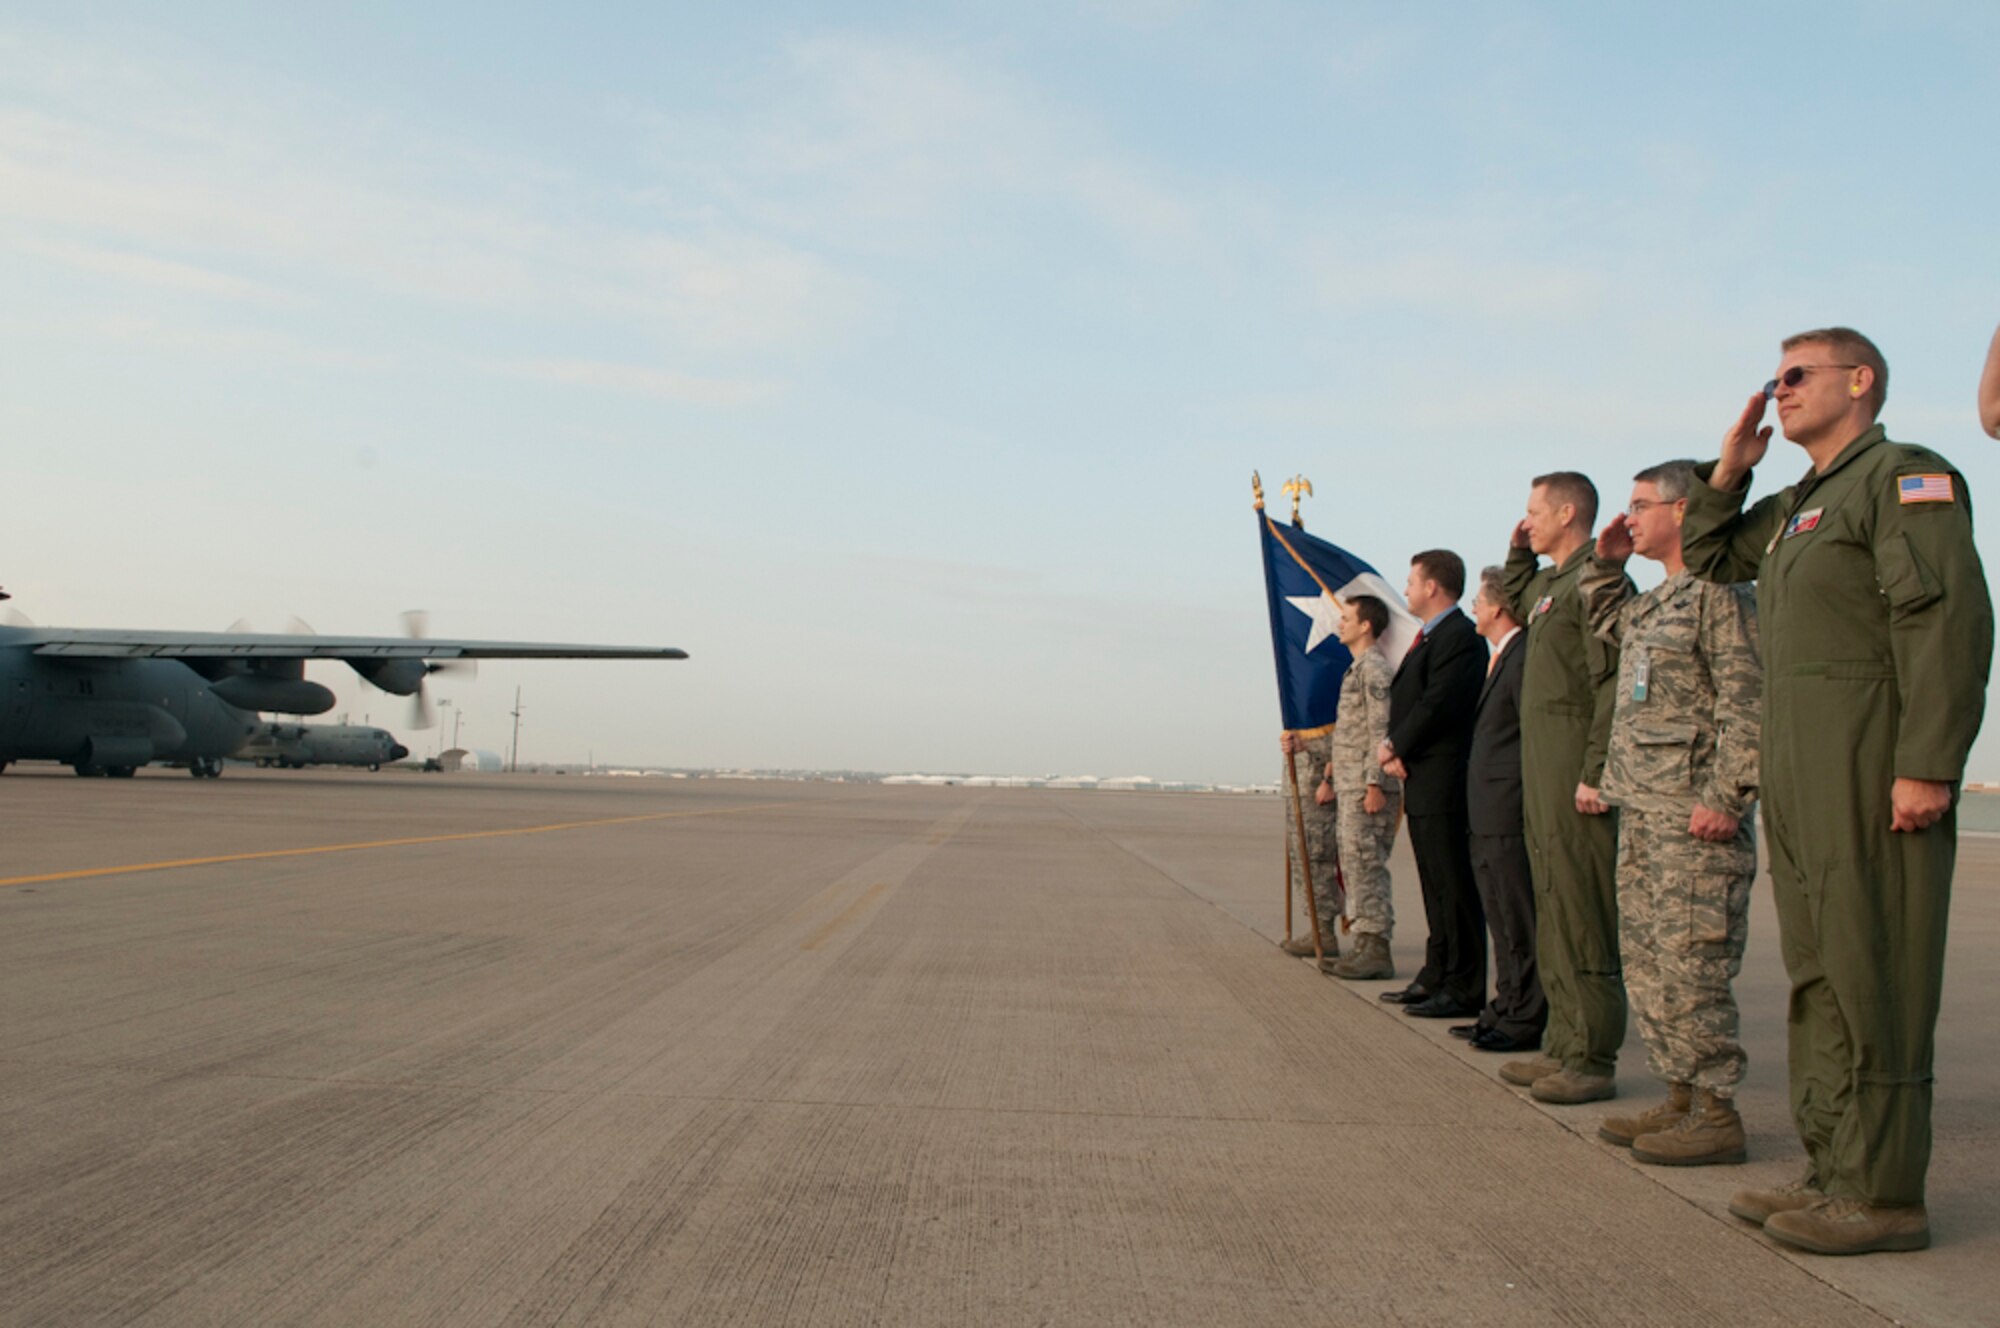 Members of the 136th Airlift Wing along with Mr. John Wood, North Texas Regional Director for Senator John Cornyn and Mr. Charles Boswell, representing State Senator Wendy Davis give honor to those deploying in support of Operation Enduring Freedom aboard the C-130H from the wing. The deployers will be supporting the 774th Expeditionary Airlift Squadron in both air and ground operations. (U.S. Air Force photo by Senior Master Sgt. Elizabeth Gilbert/released)